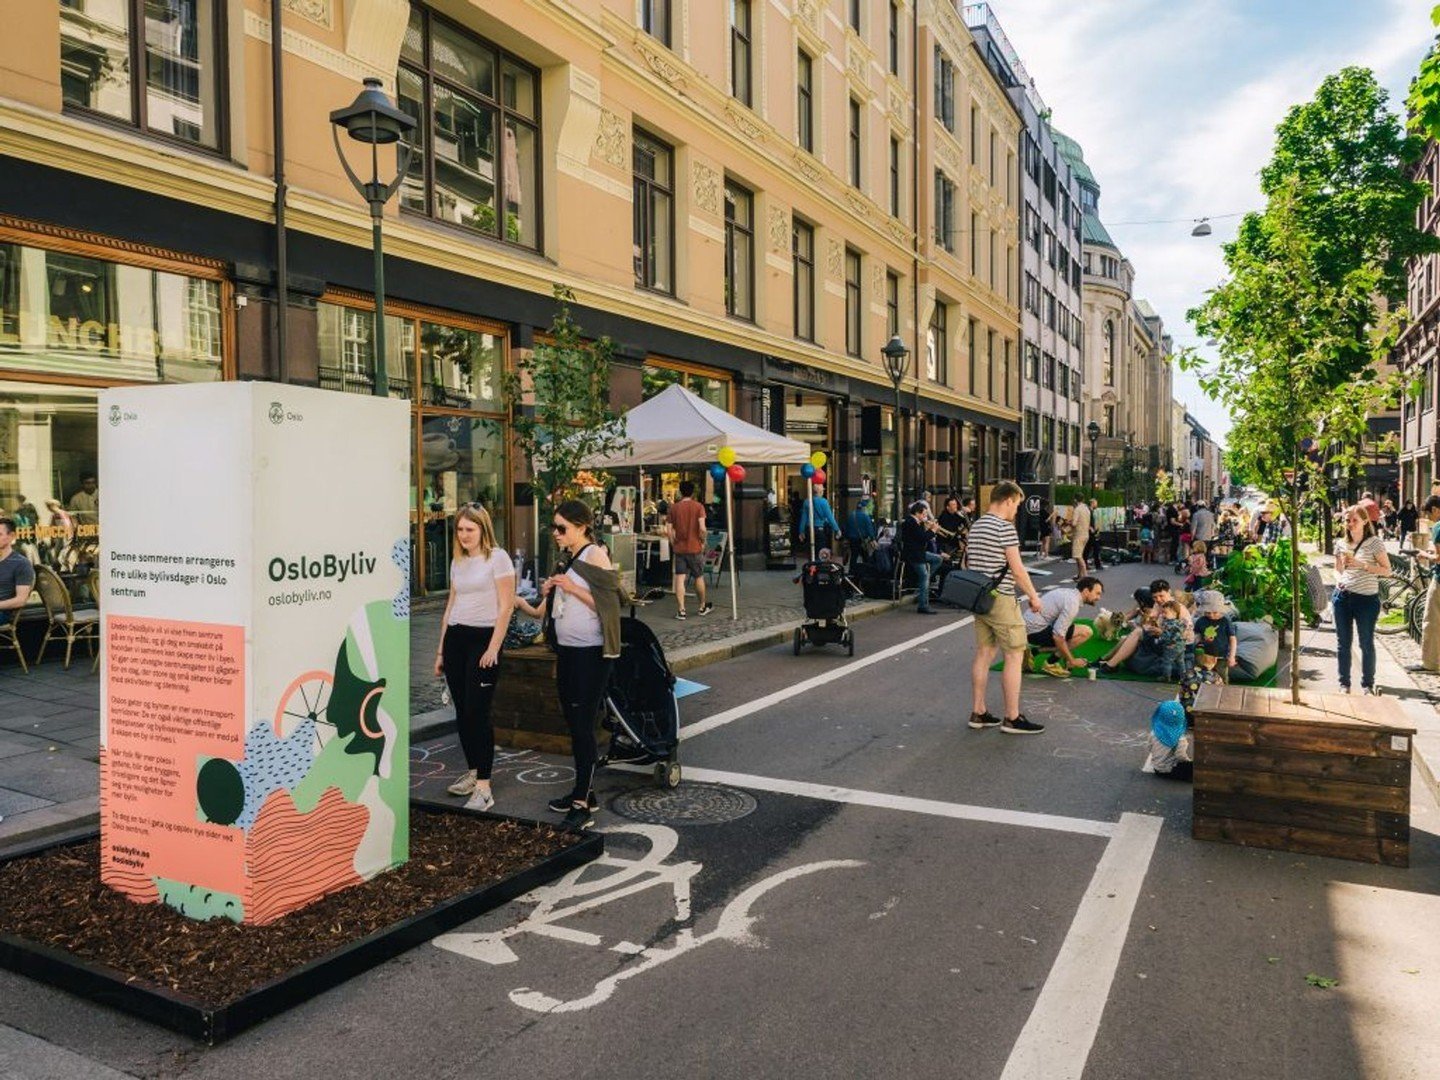 Oslo achieved zero cycling and pedestrian deaths in 2019 &mdash; learn how the city's focus on public transportation and infrastructure improvements made streets safer for everyone at our link in bio.